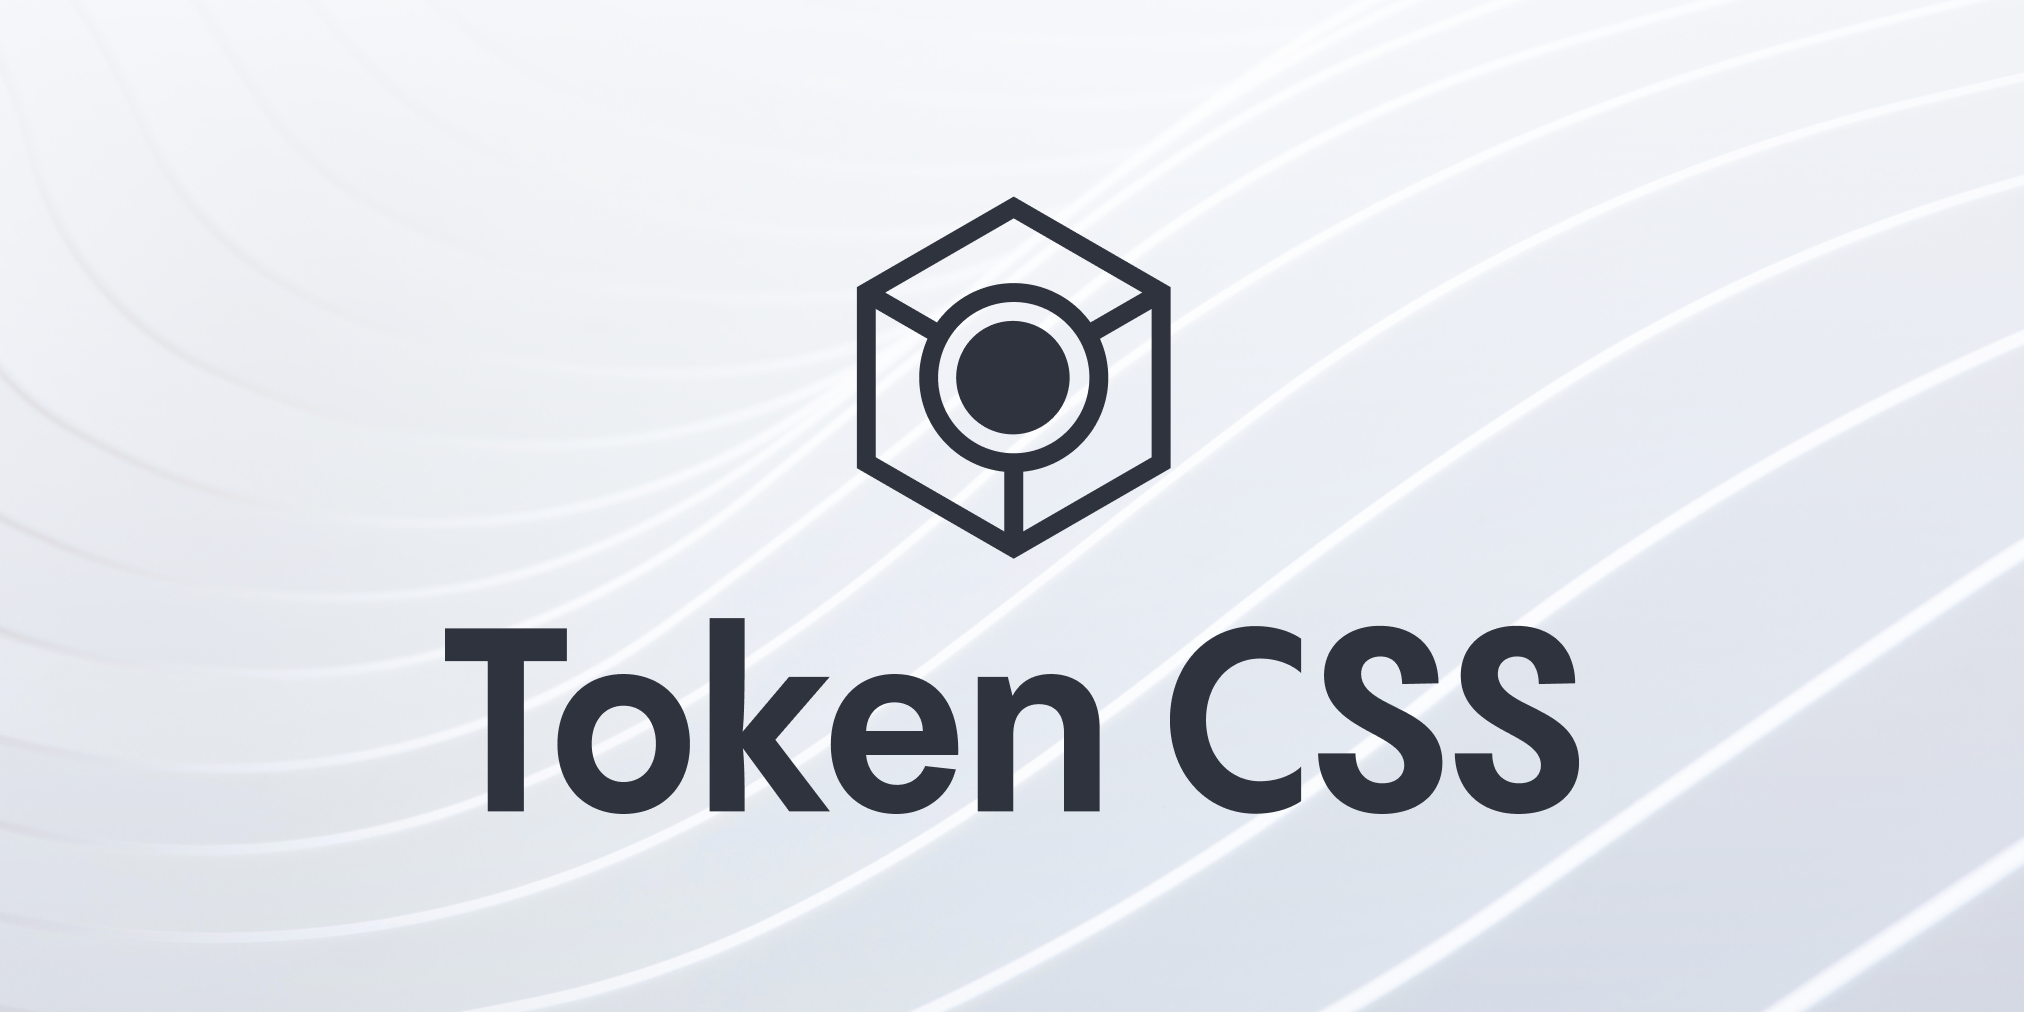              Token CSS is a new tool that seamlessly integrates Design Tokens             into your development workflow. Conceptually, it is inspired